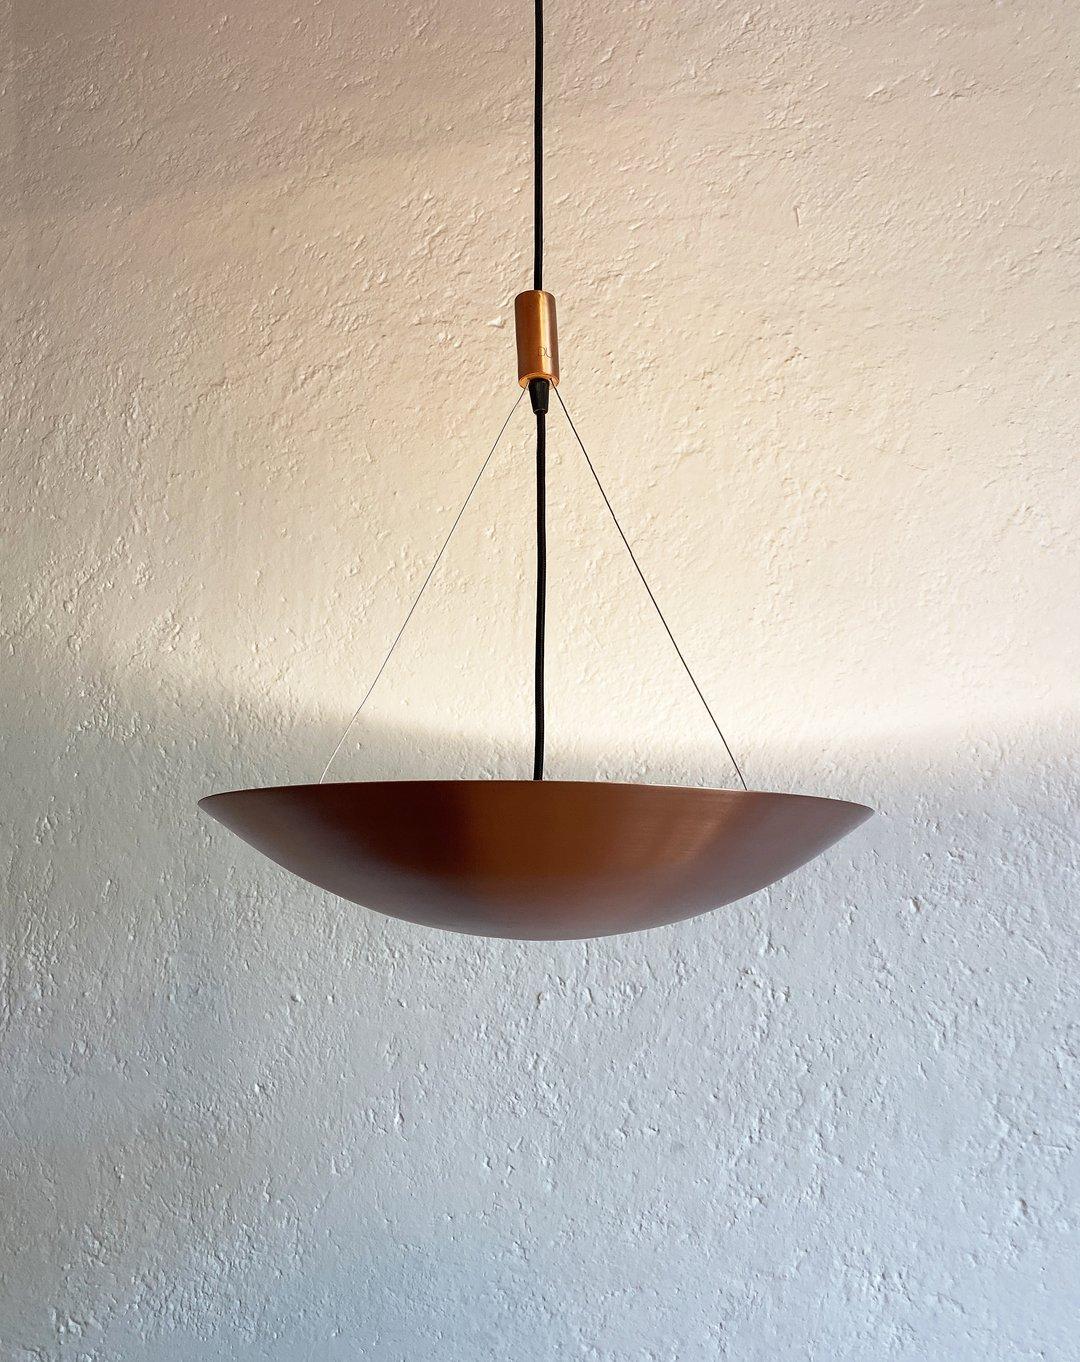 Plato Arriba is a dimmable ceiling lamp with led strip, driver included and dimmer wall control not included. This pendant features a steel structure covered in electrostatic metal finish and wood detail. The dome is connected to the ceiling with